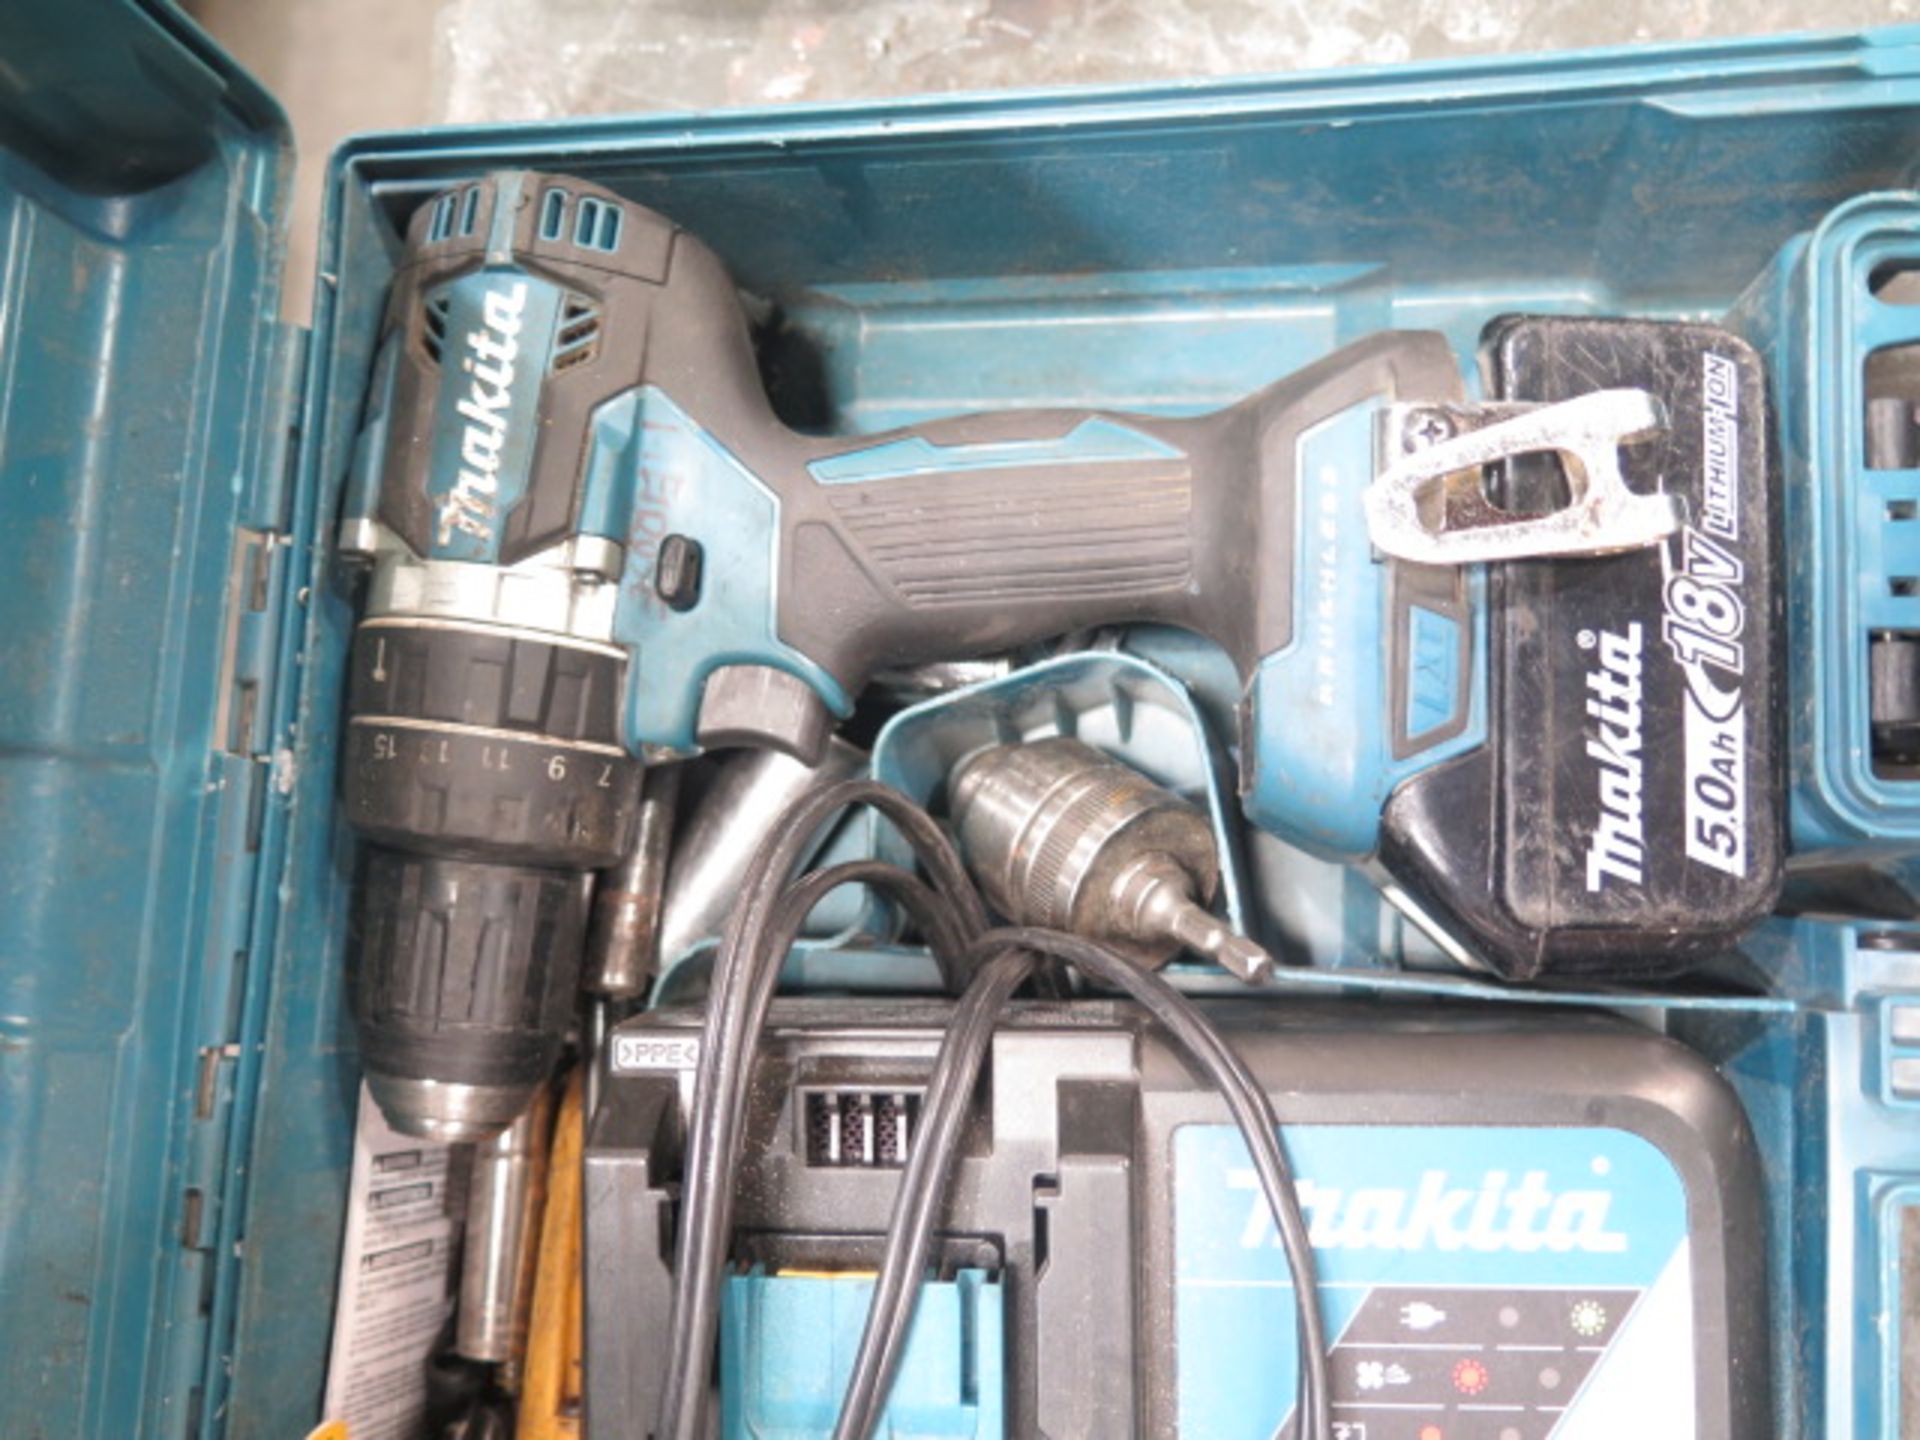 Makita 18V Cordless Drill and Nut Driver Set w/ Charger (SOLD AS-IS - NO WARRANTY) - Image 3 of 5